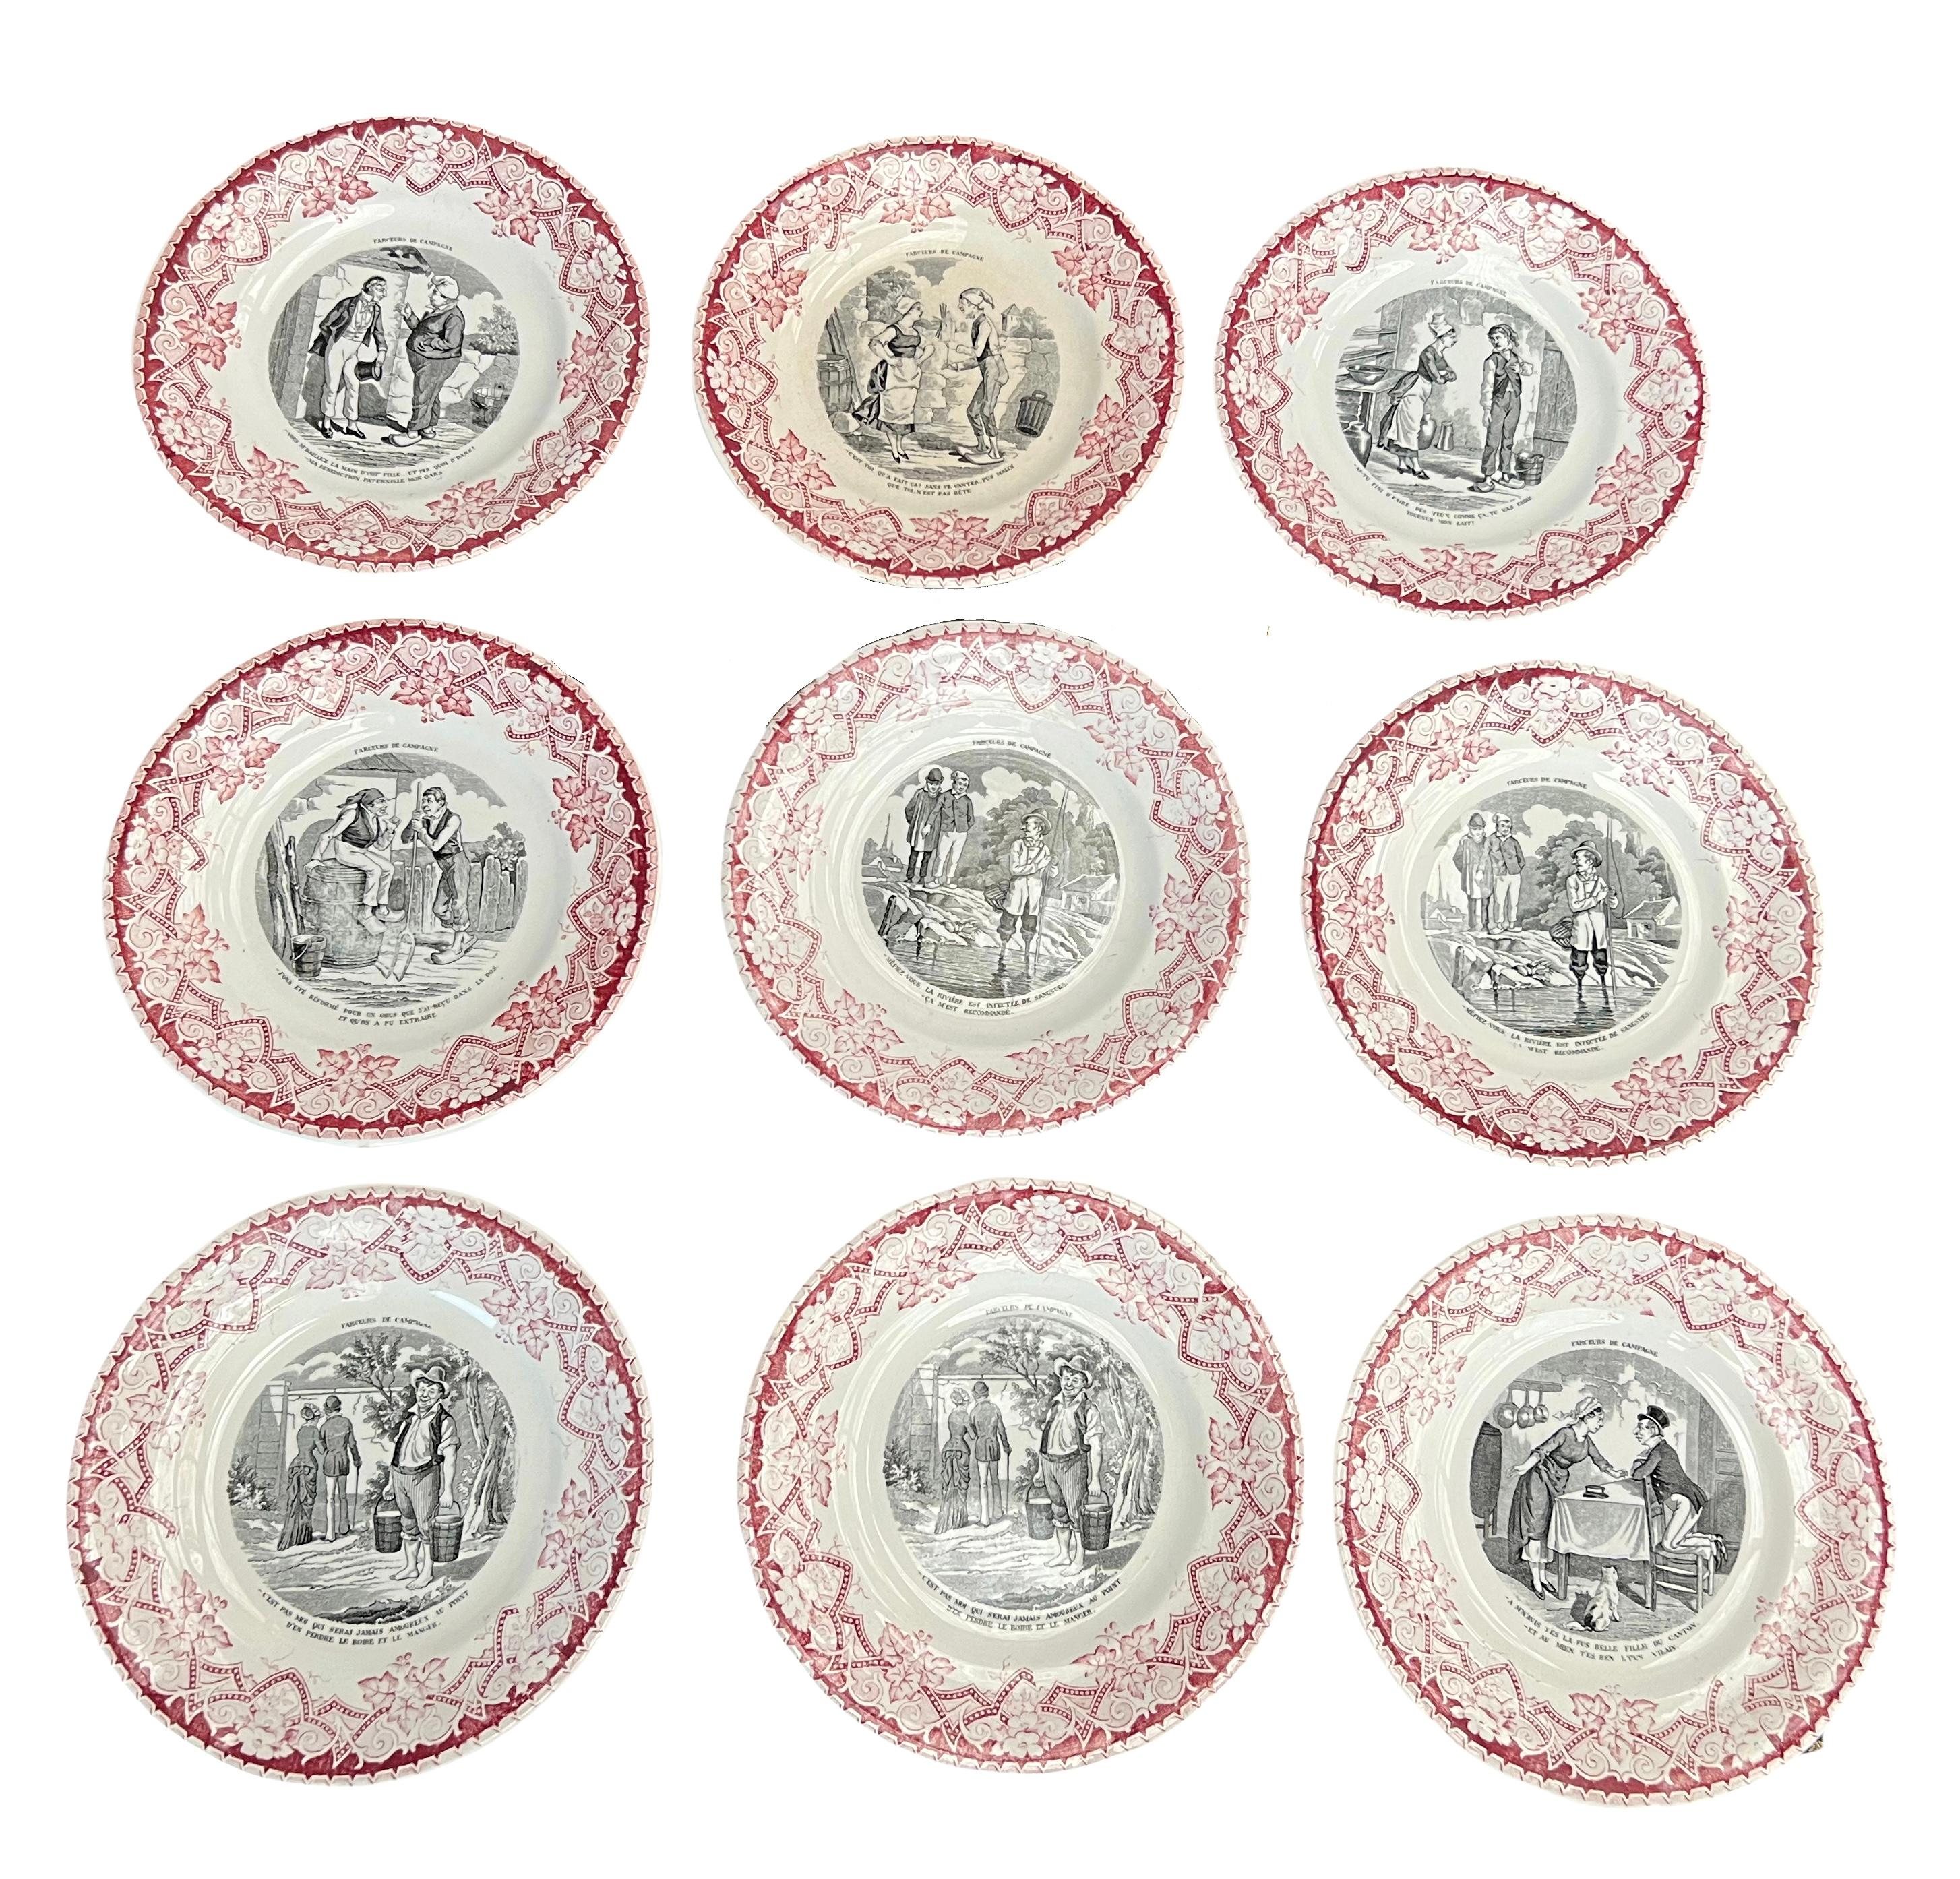 9 French Luneville faience transferware plates also known as assiette parlante or talking dish.
They come from the east of France.
They are marked on the underside with a red printed Luneville mark used since 1892 and impressed codes.

They are